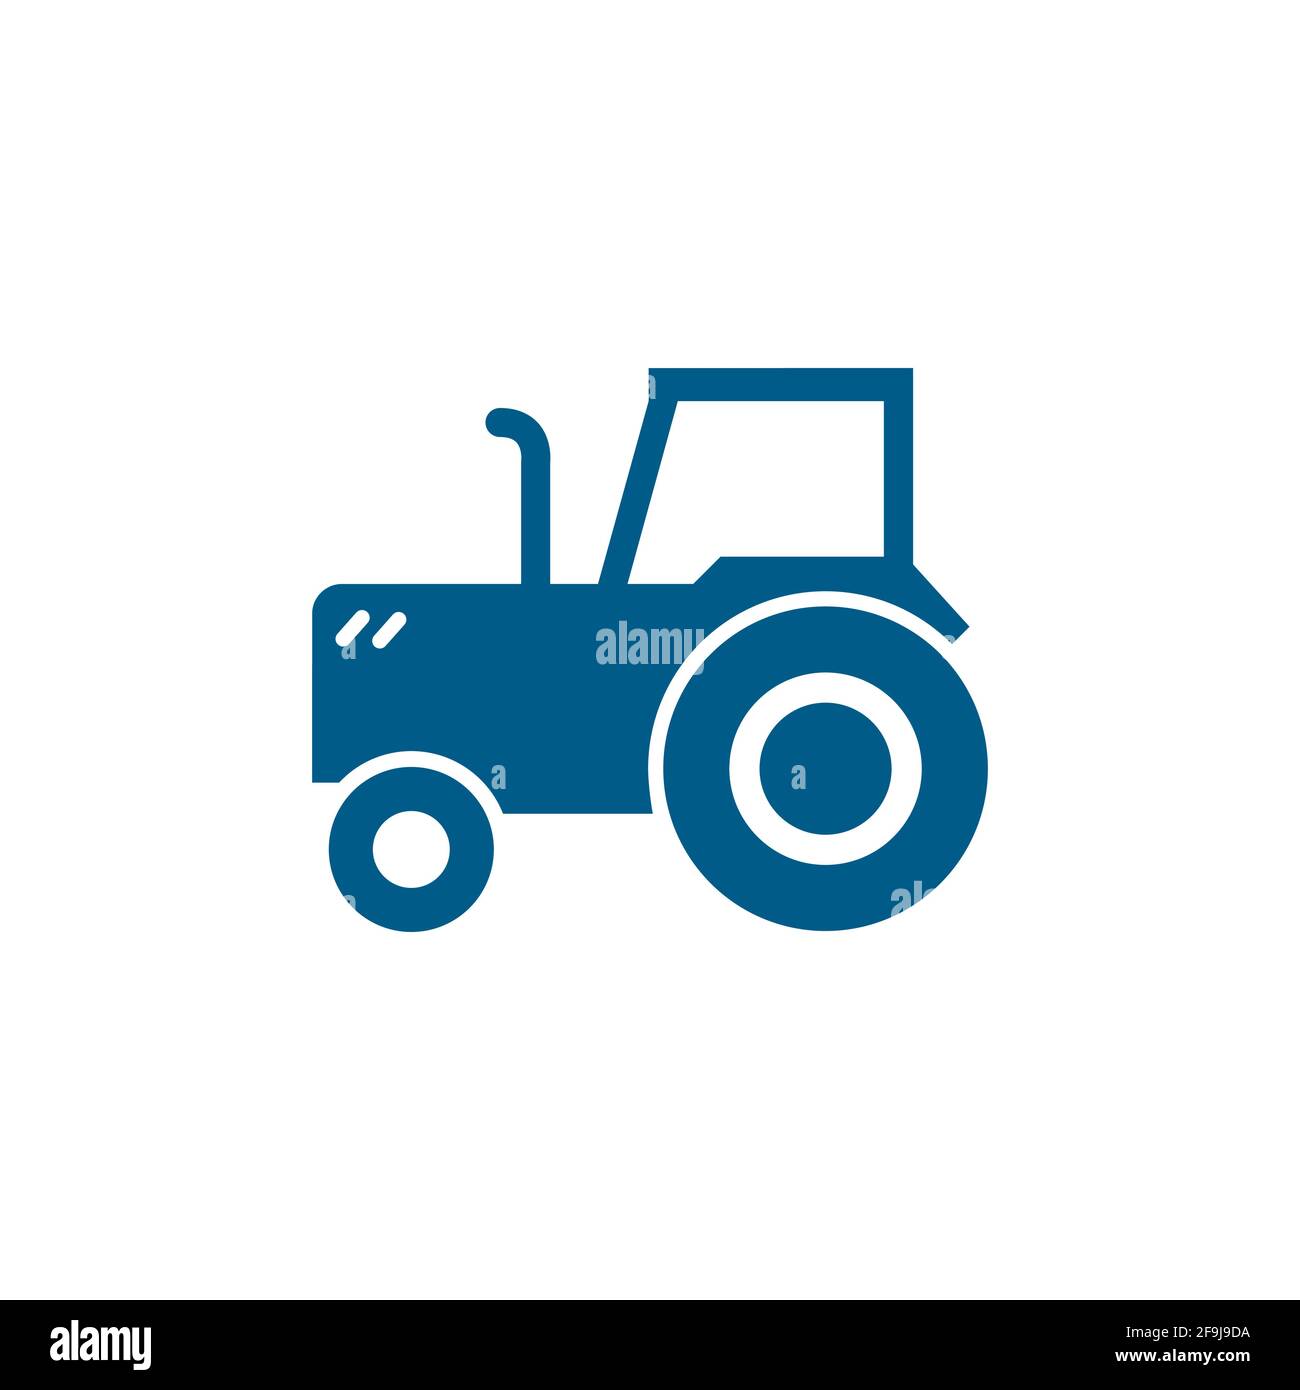 agriculture background clipart blue